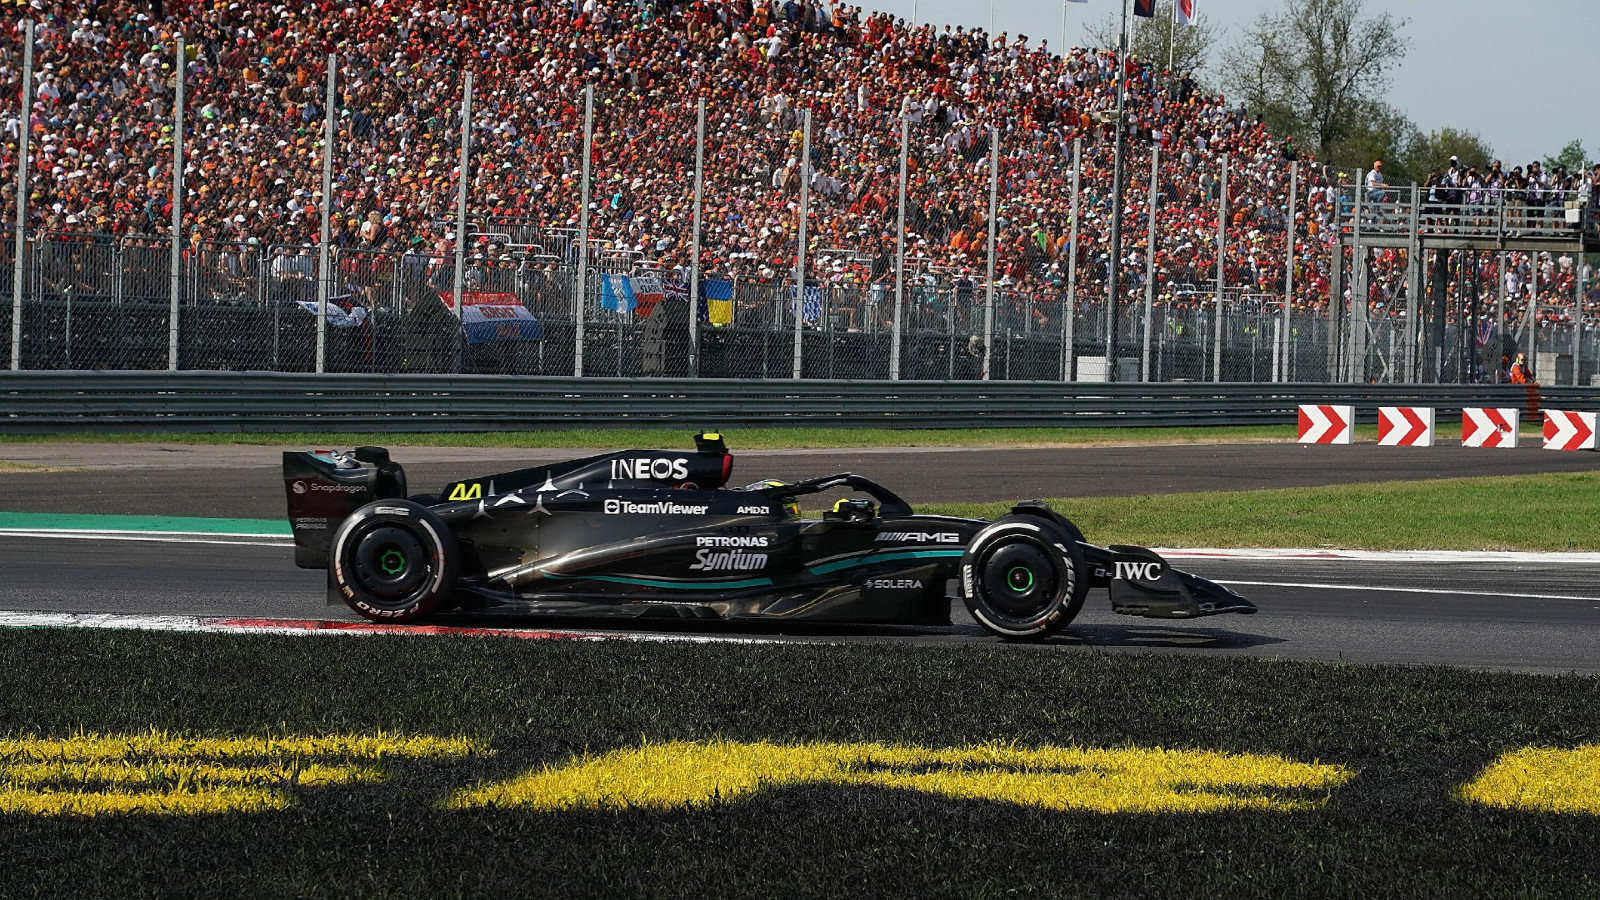 Monza: Lewis Hamilton drives his Mercedes through the first chicane at the Italian Grand Prix.